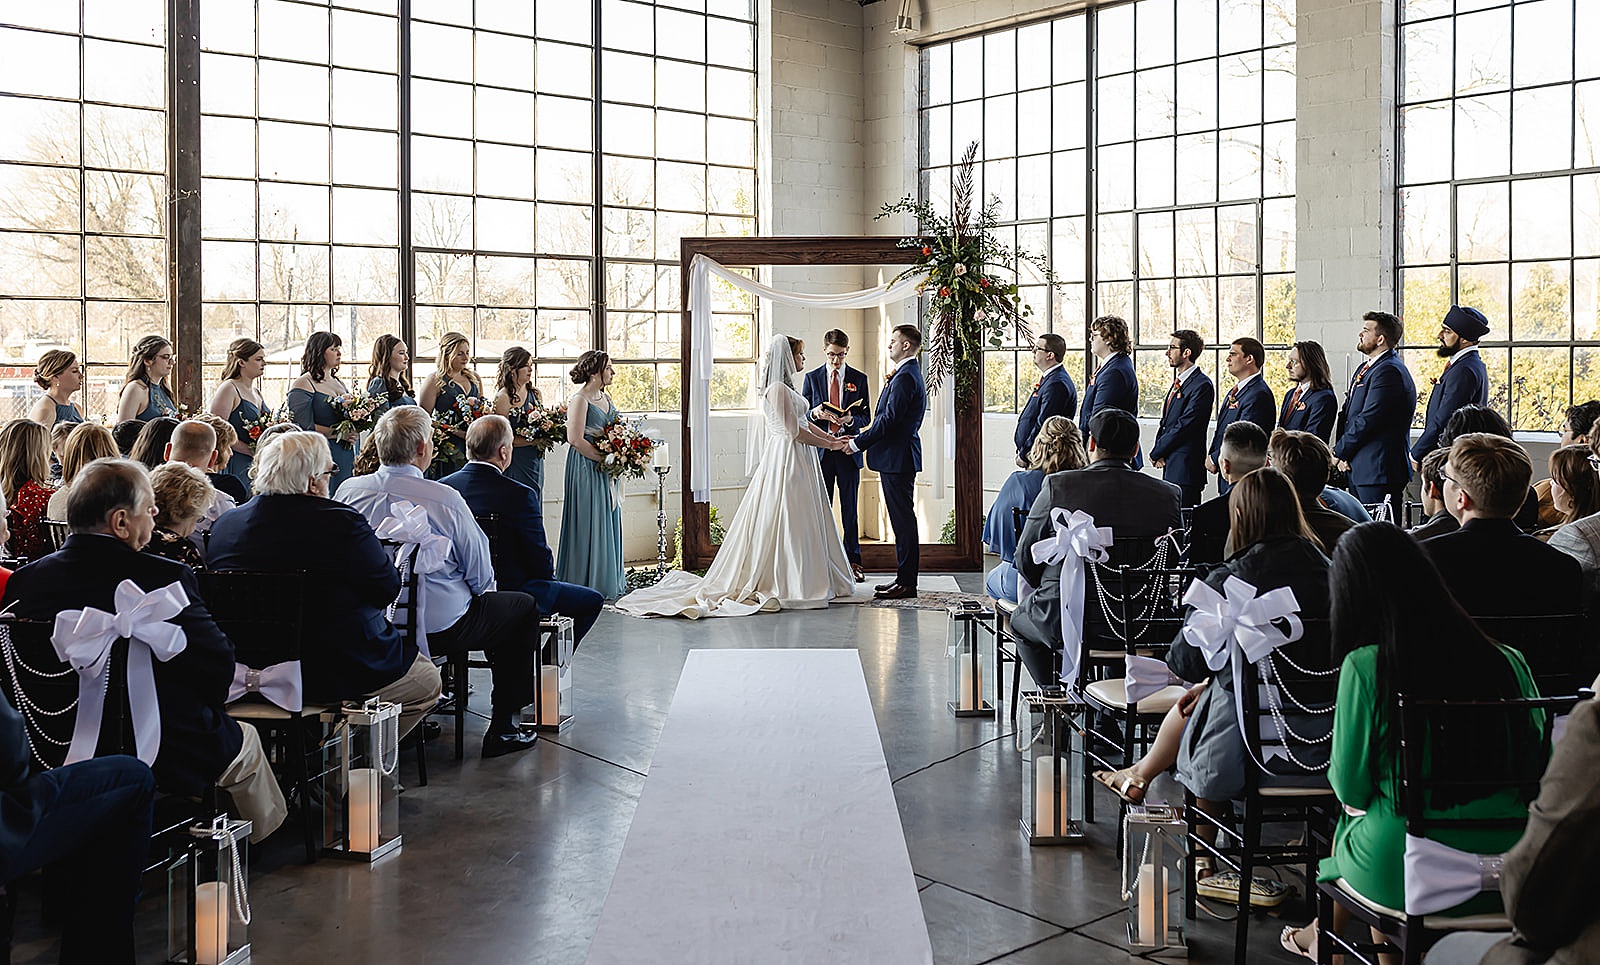 A bride and groom stand beneath an arch in an industrial Louisville wedding venue.